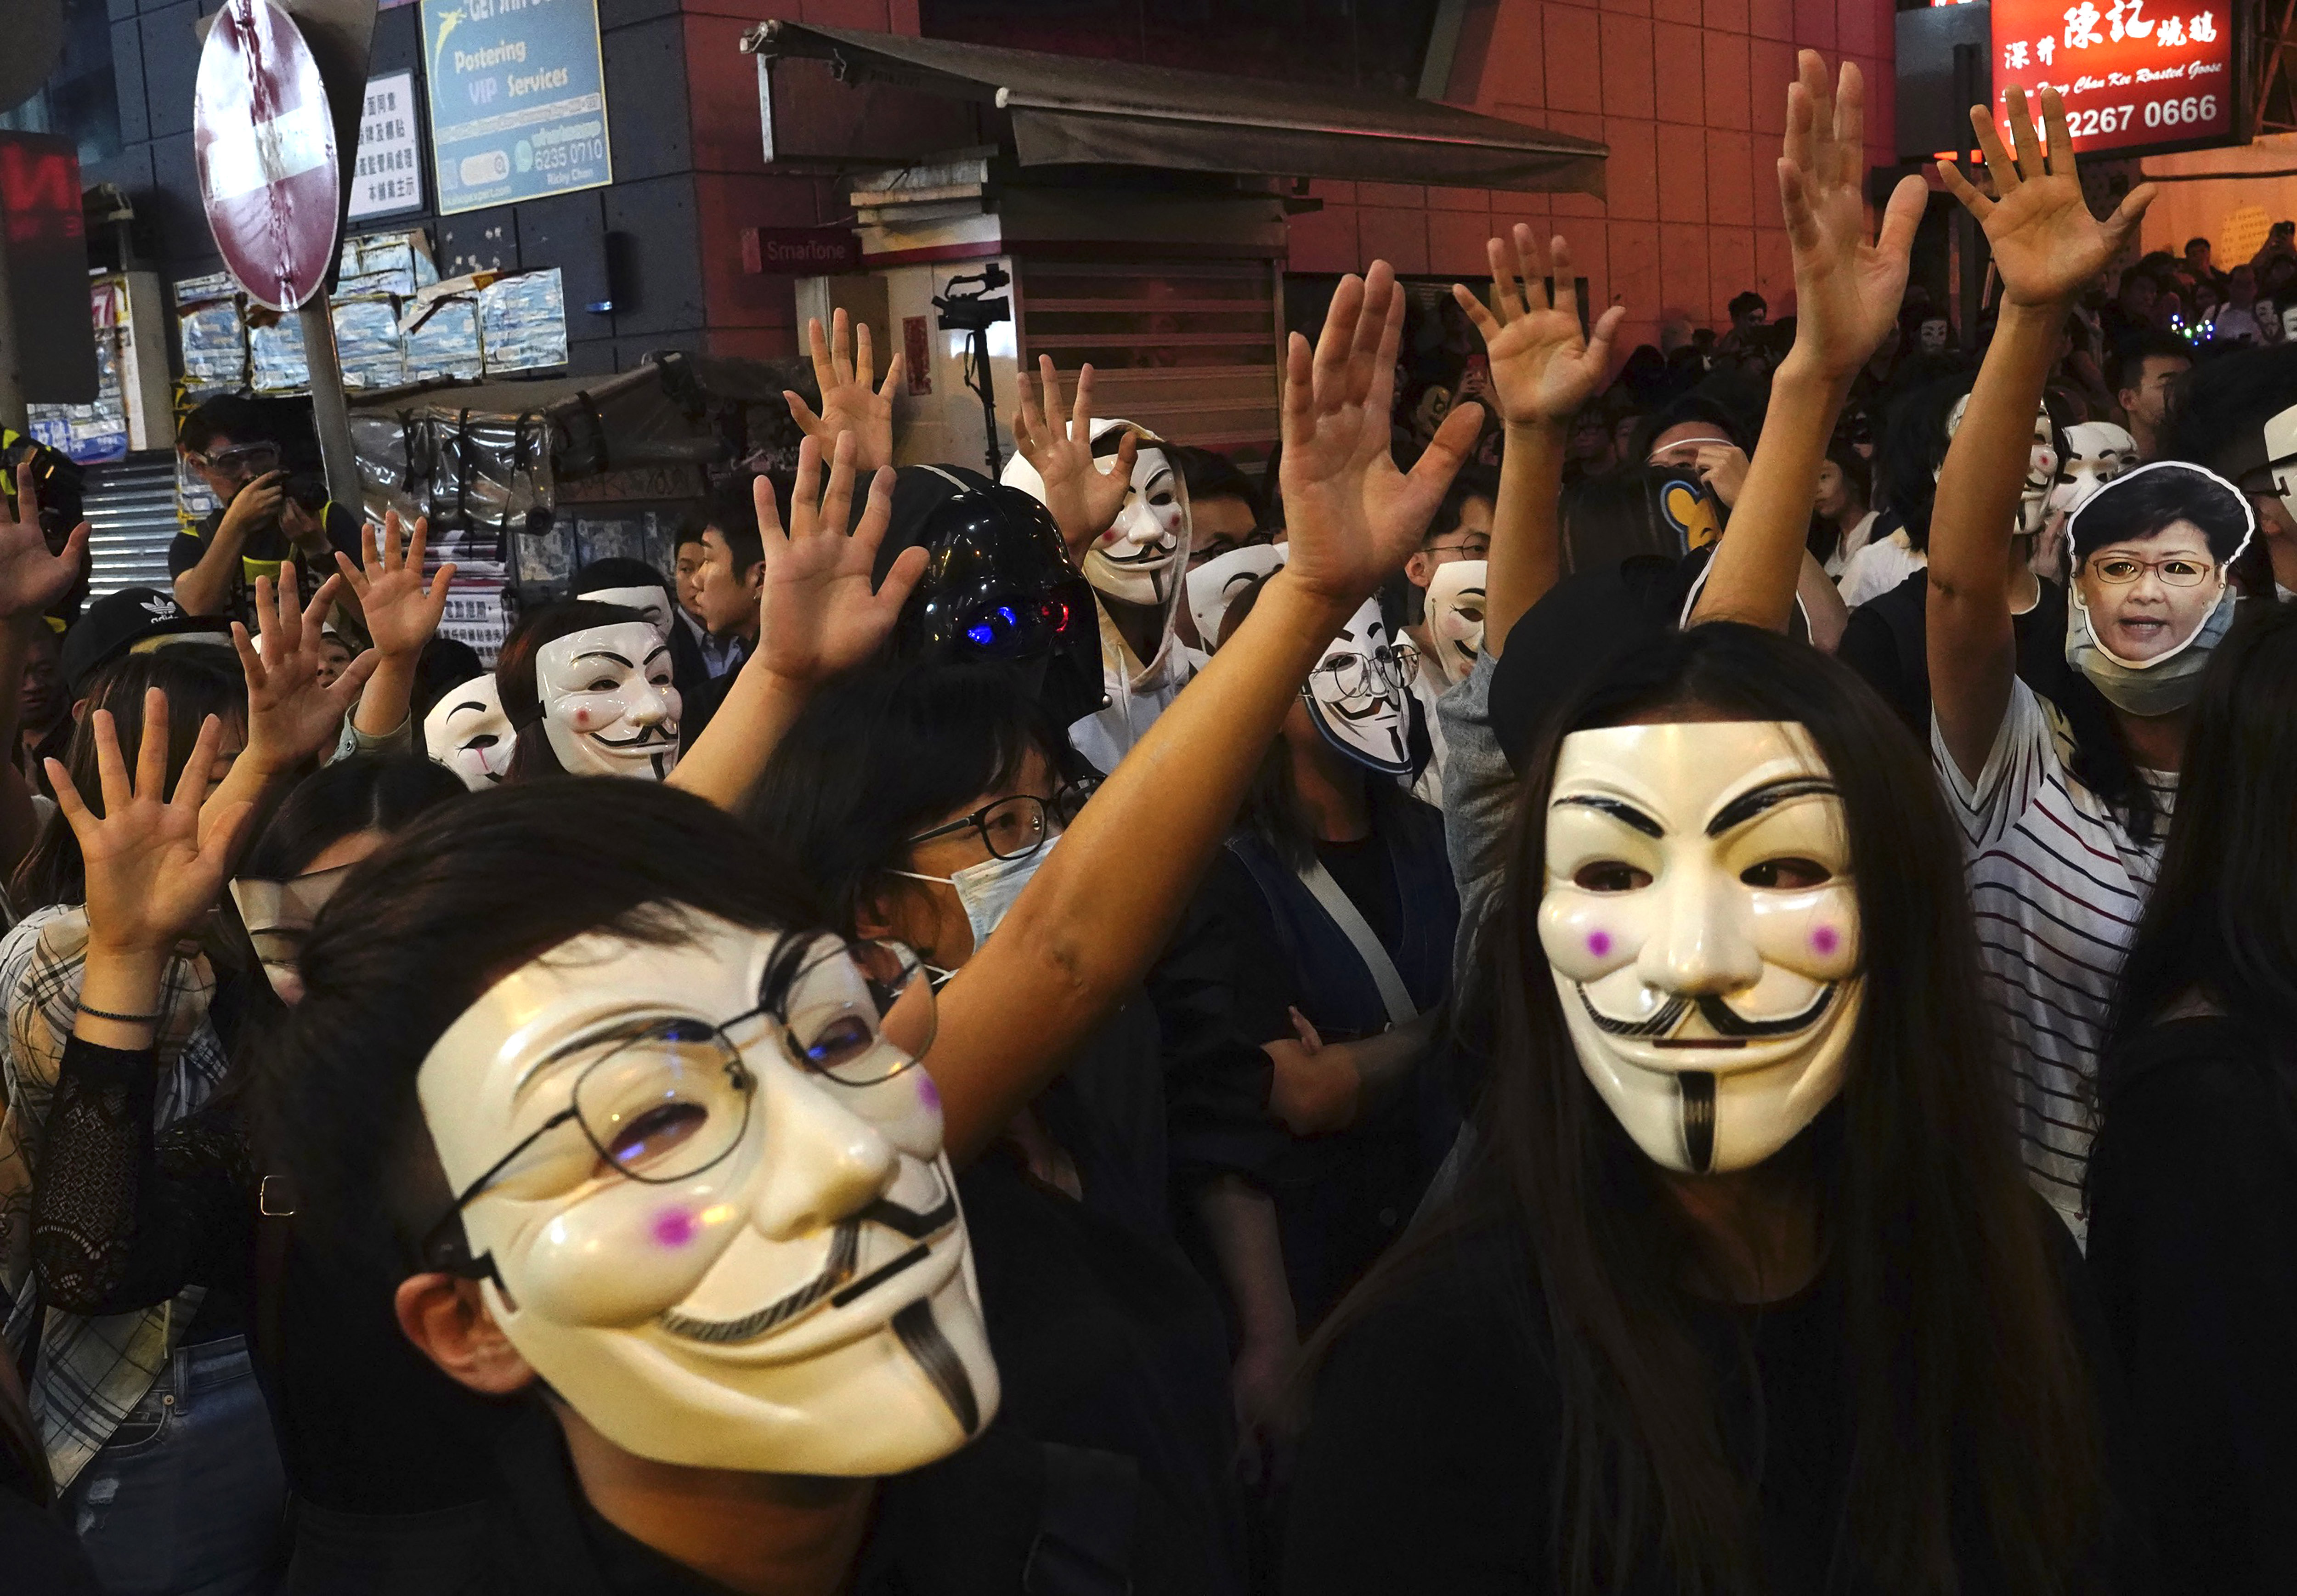 People in Guy Fawkes masks raise their hands as they gather on a street in Hong Kong, Thursday, Oct. 31, 2019. Hong Kong authorities are bracing as pro-democracy protesters urged people on Thursday to celebrate Halloween by wearing masks on a march in defiance of a government ban on face coverings. (AP Photo/Vincent Yu)